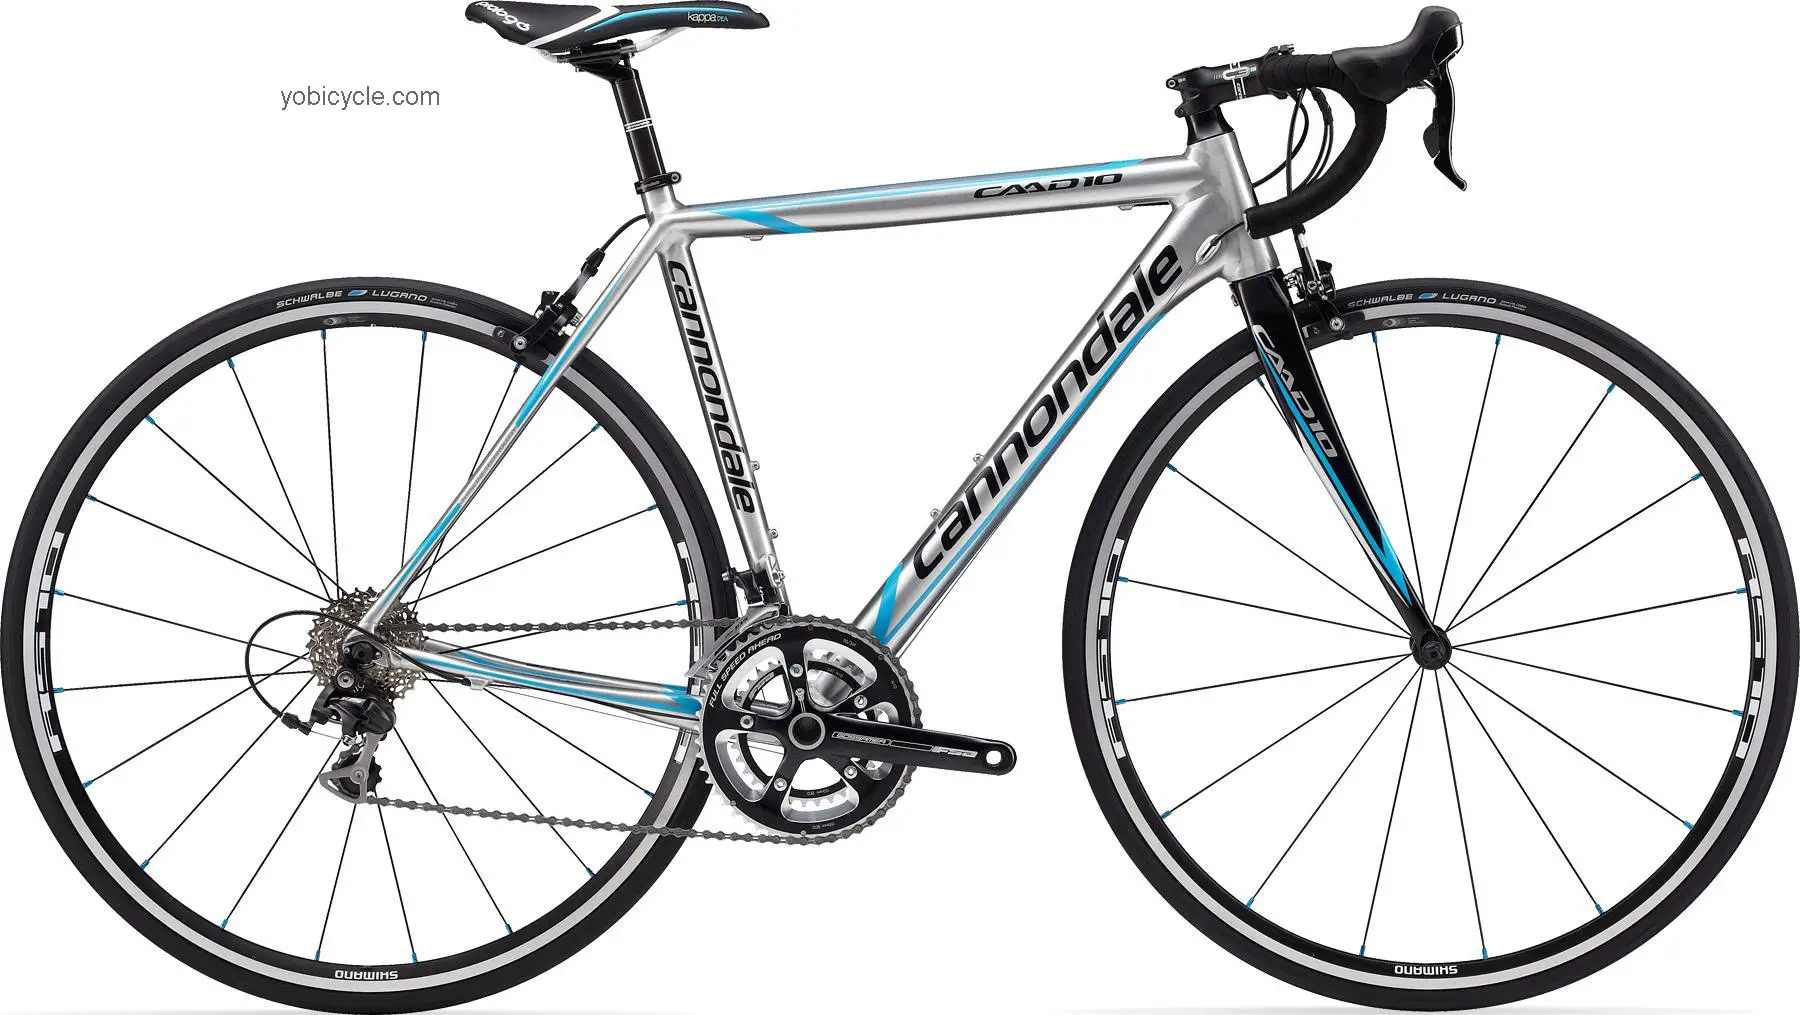 Cannondale CAAD10 Womens 5 2012 comparison online with competitors